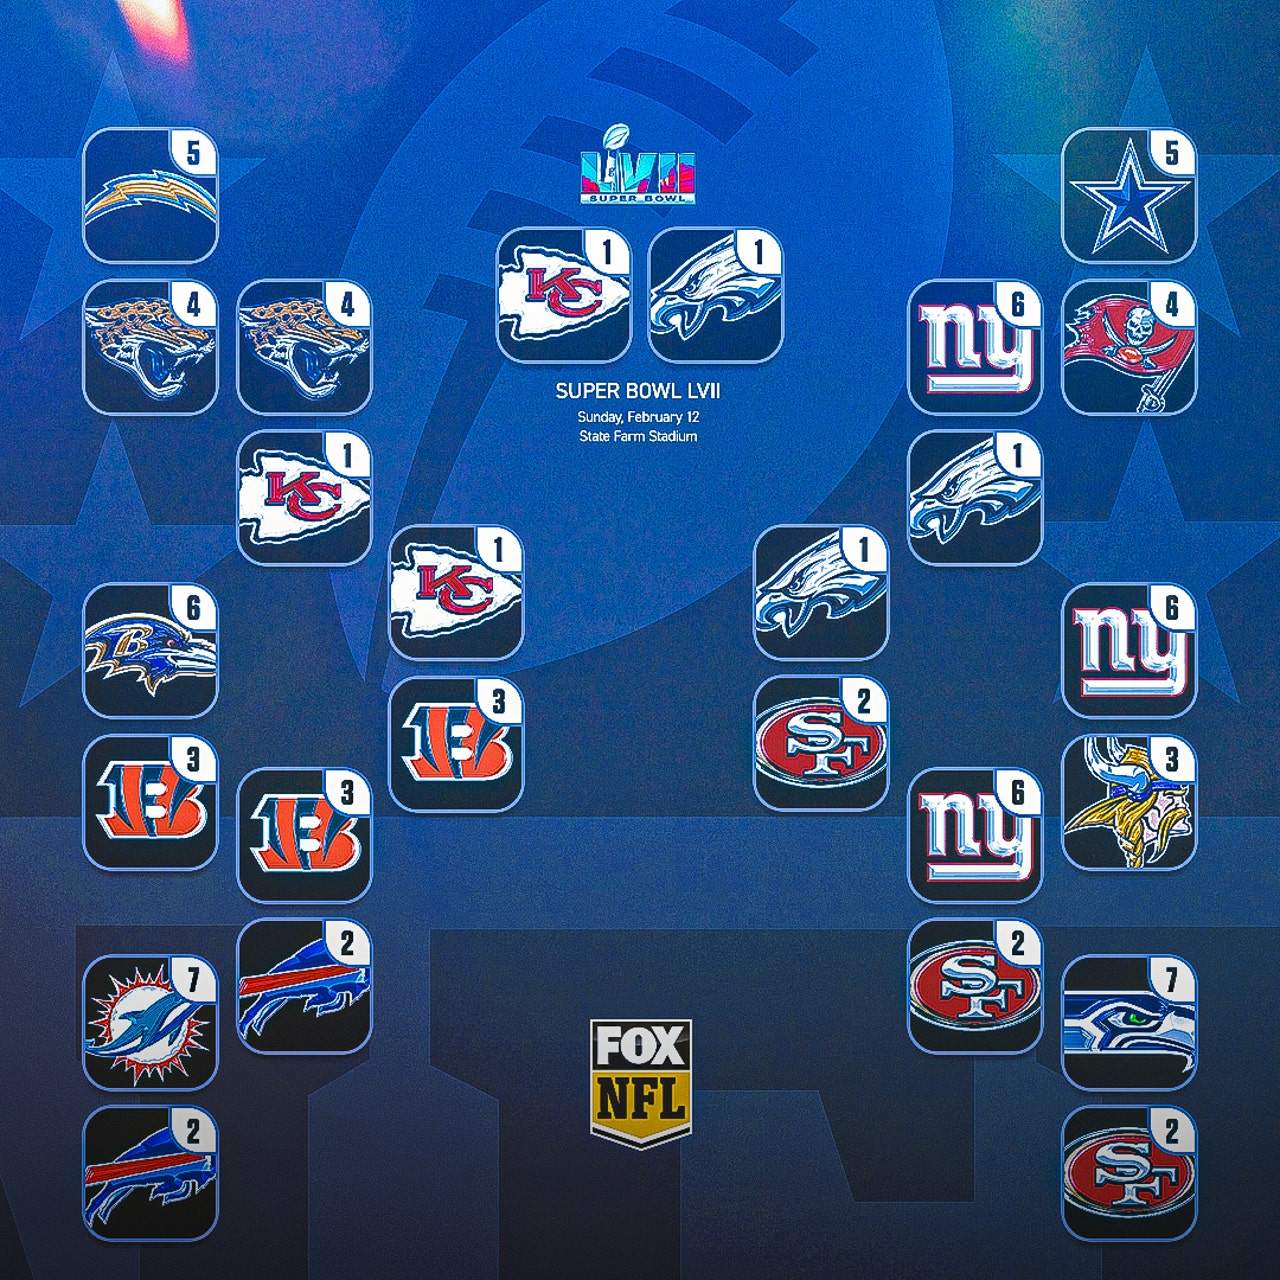 nfl playoff predictions today's games